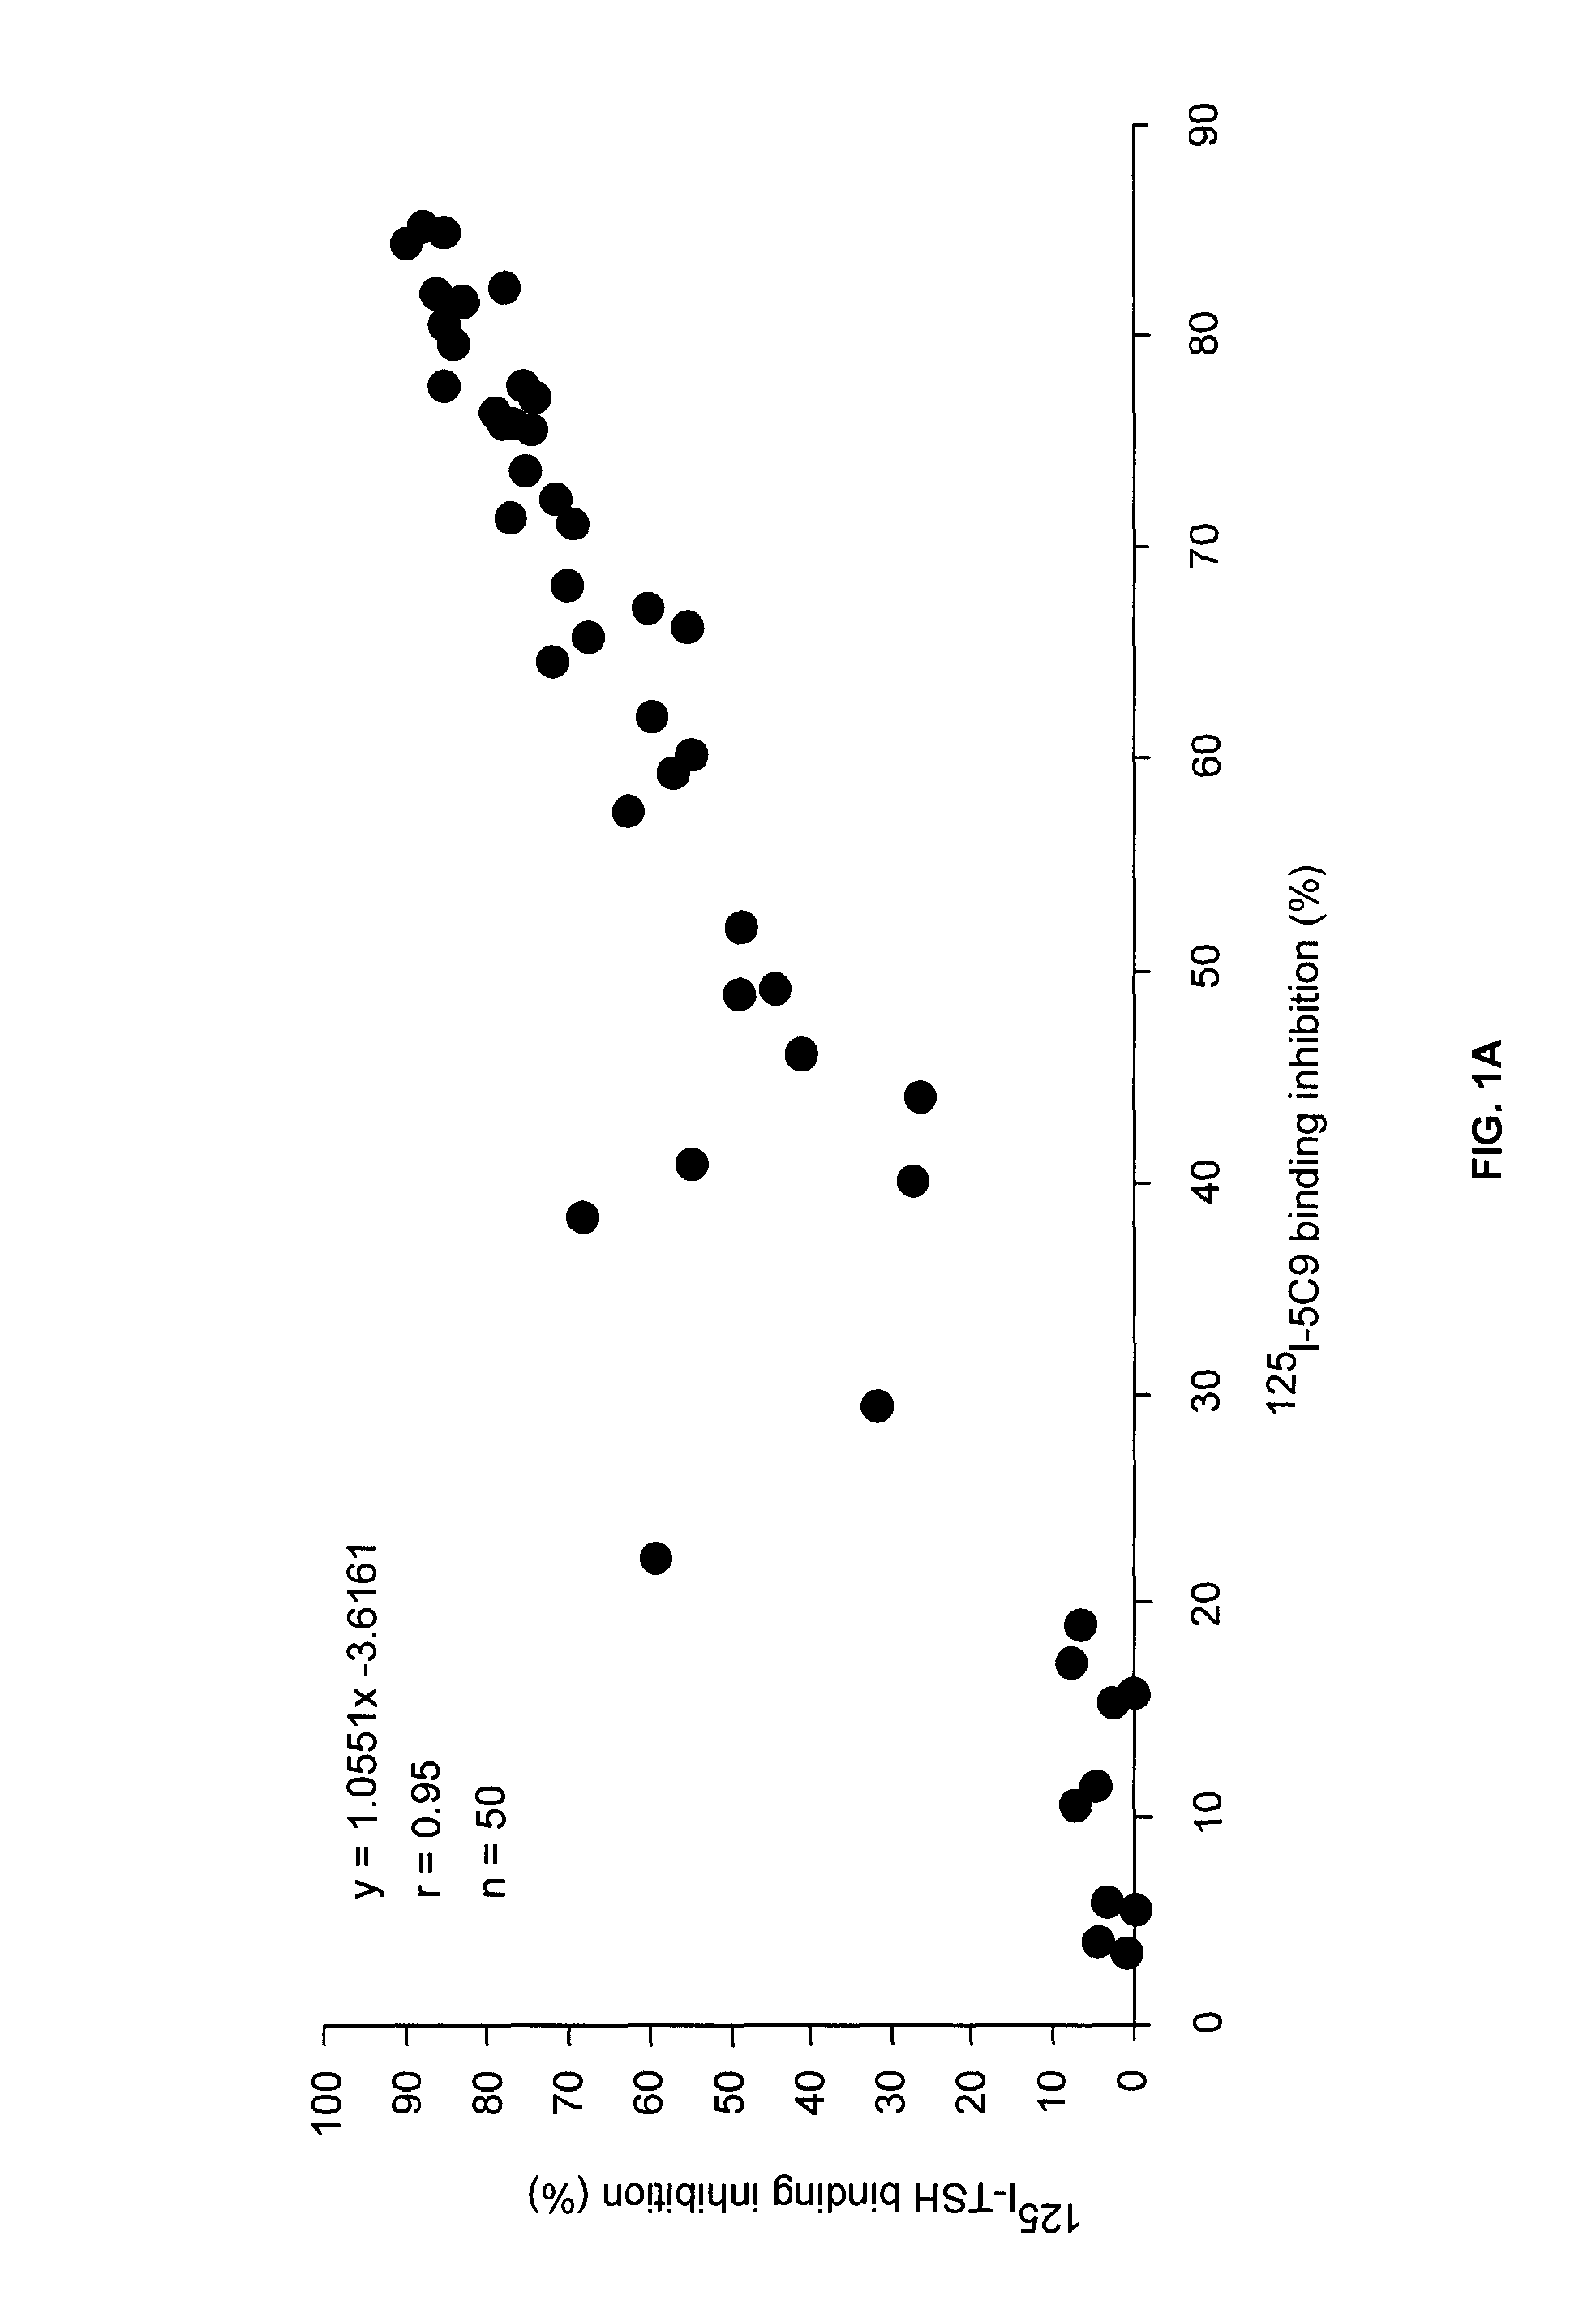 Human monoclonal antibodies to the thyrotropin receptor which act as antagonists